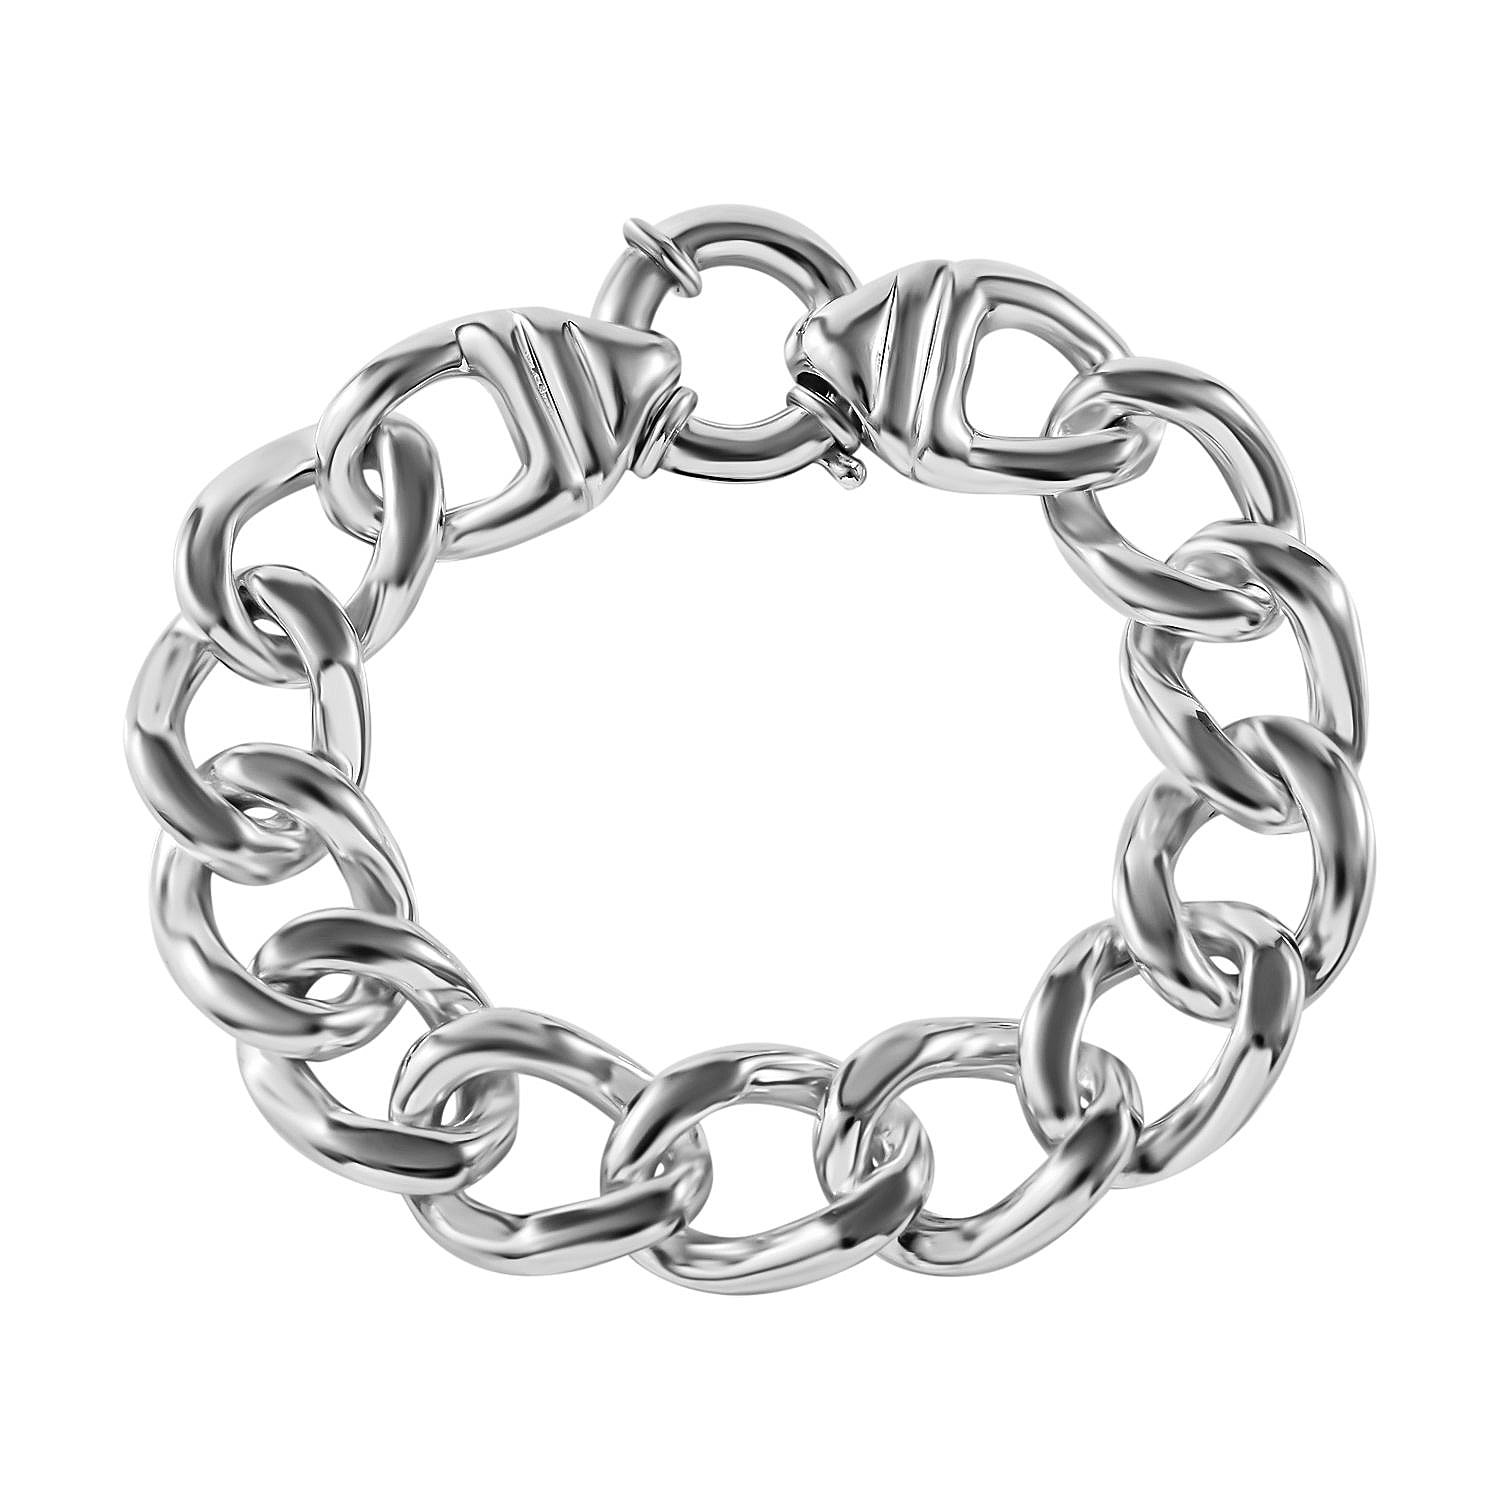 Royal Bali Collection - Sterling Silver Curb Bracelet (Size - 7.5), Silver Wt. 20.90 Gms